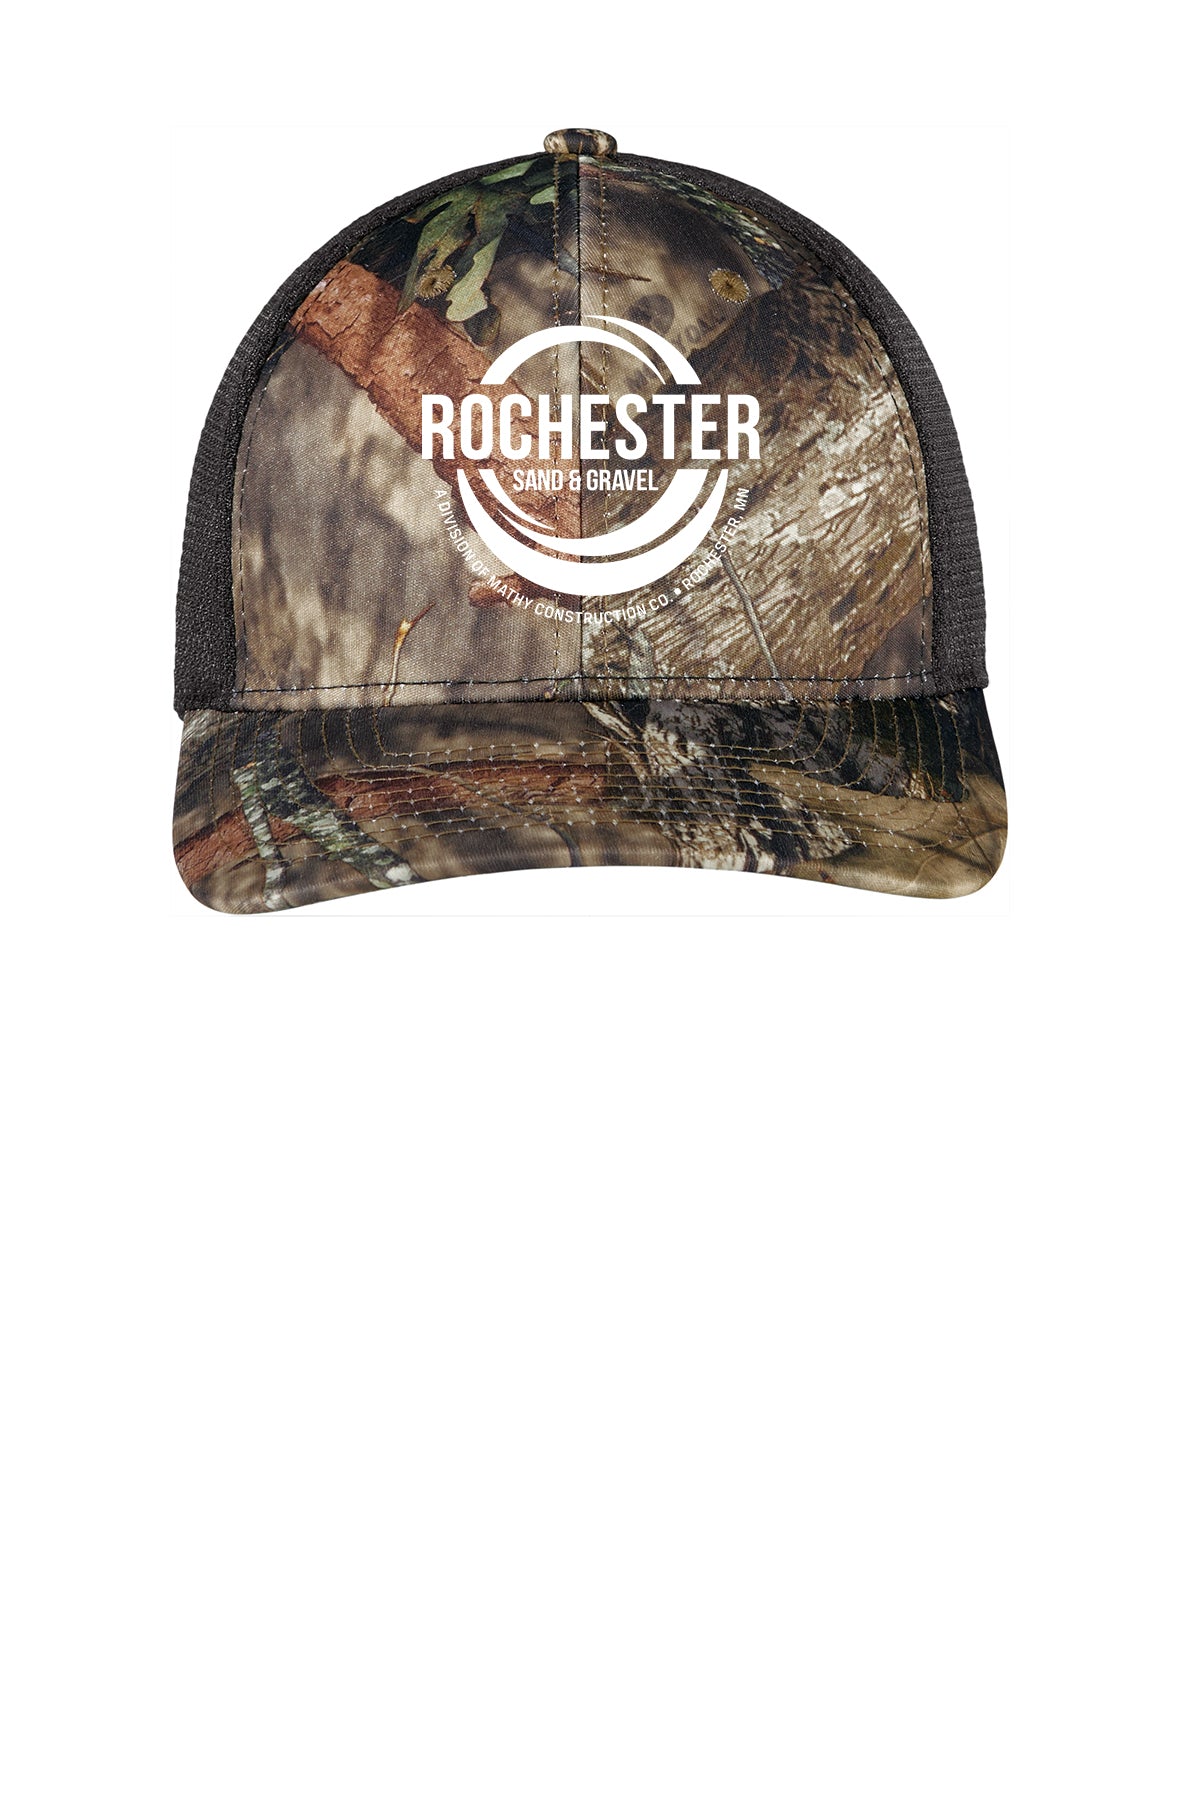 Rochester Sand and Gravel Limited Edition Camo Trucker Cap